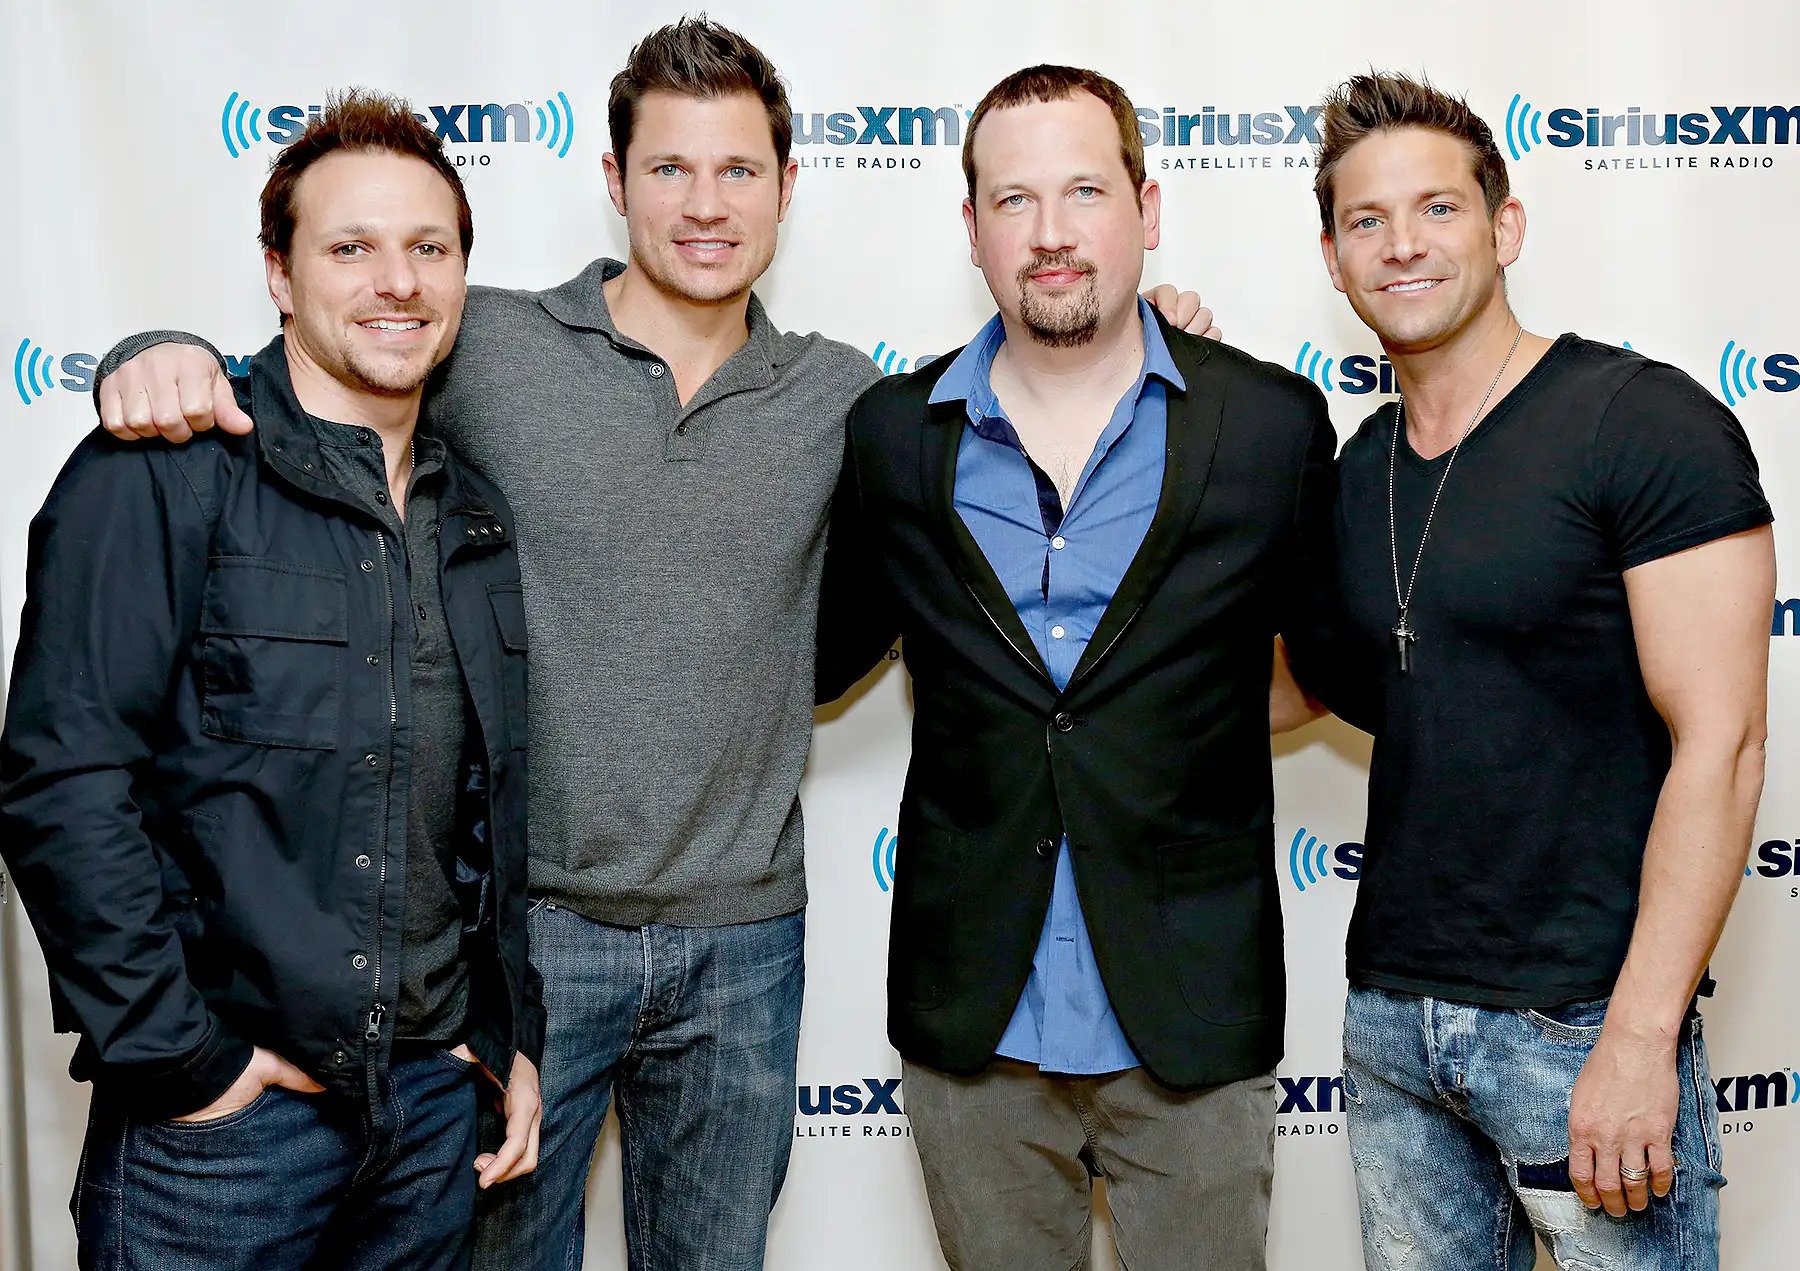 98° (@98degrees) • Instagram photos and videos